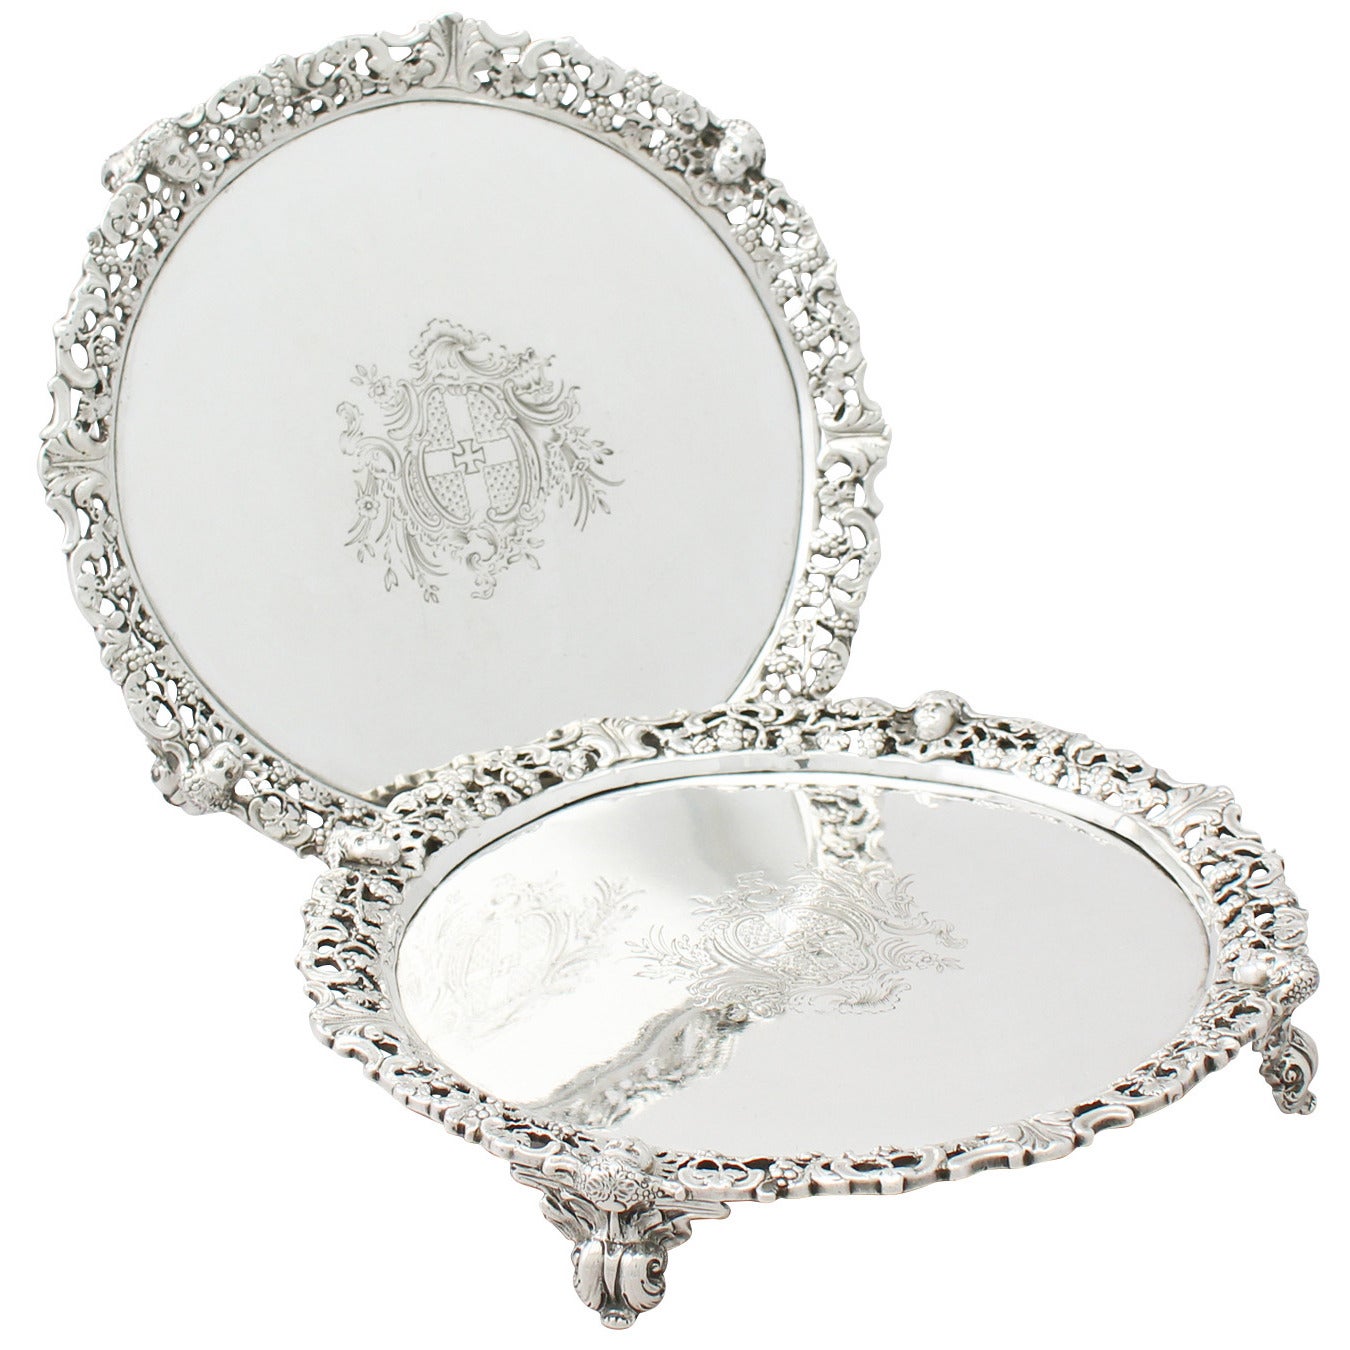 An exceptional, fine and impressive pair of antique Georgian English sterling silver salvers; an addition to our tray and salver collection

These exceptional antique George II sterling silver salvers have a circular shaped form.

The surface of